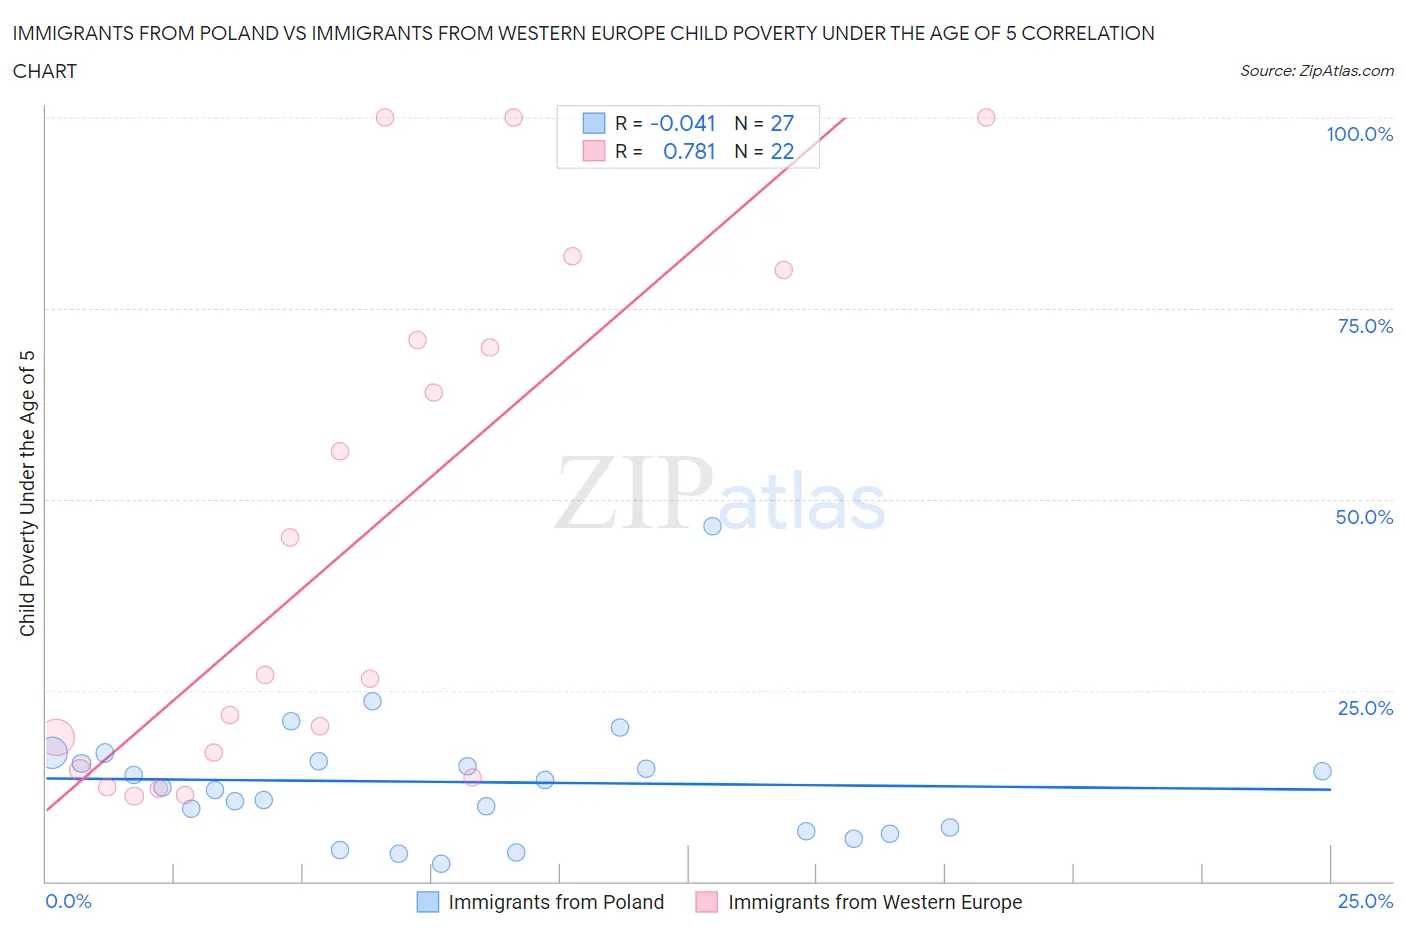 Immigrants from Poland vs Immigrants from Western Europe Child Poverty Under the Age of 5